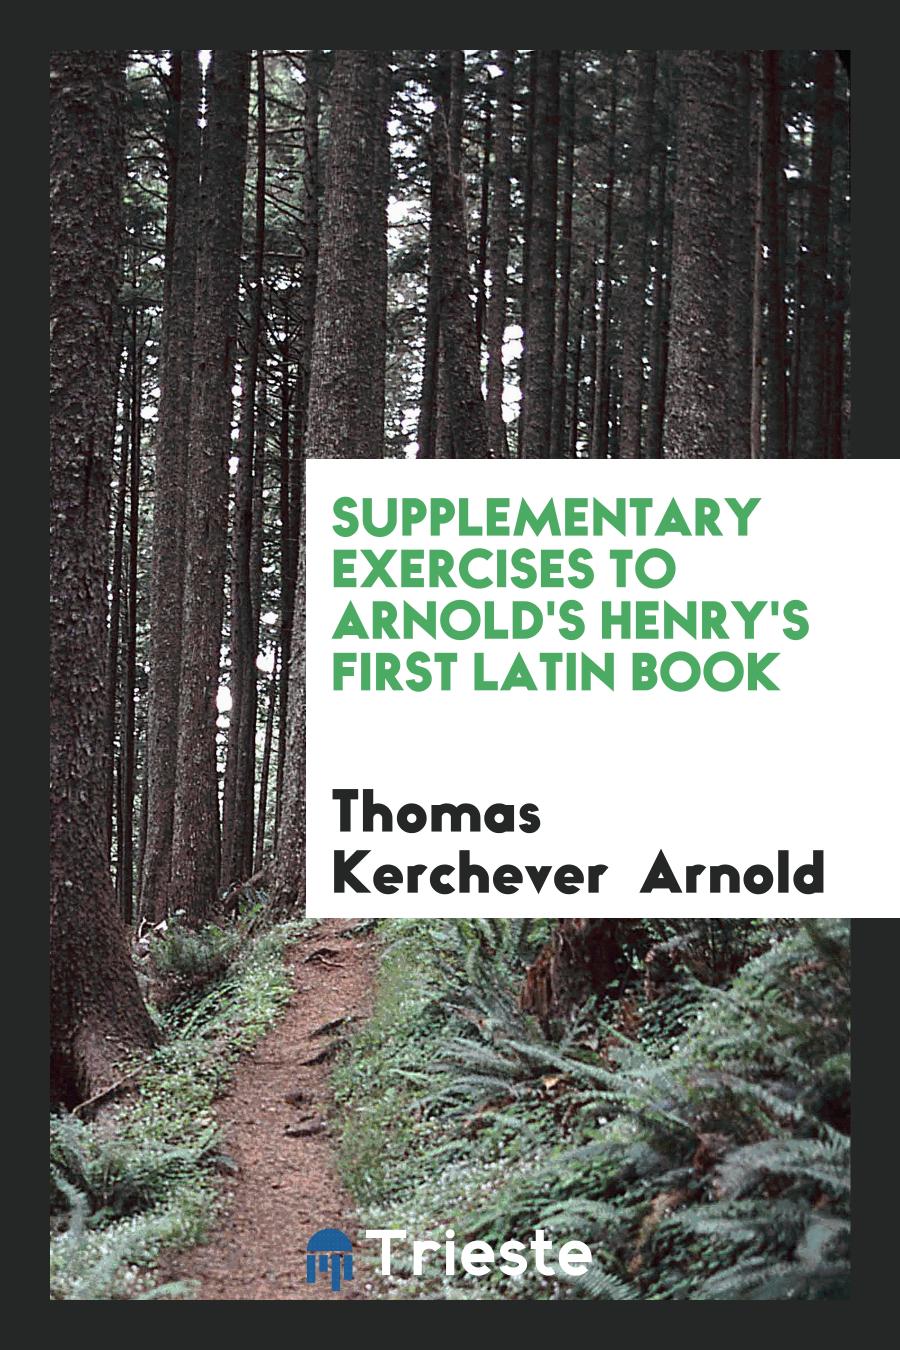 Supplementary exercises to Arnold's Henry's First Latin Book